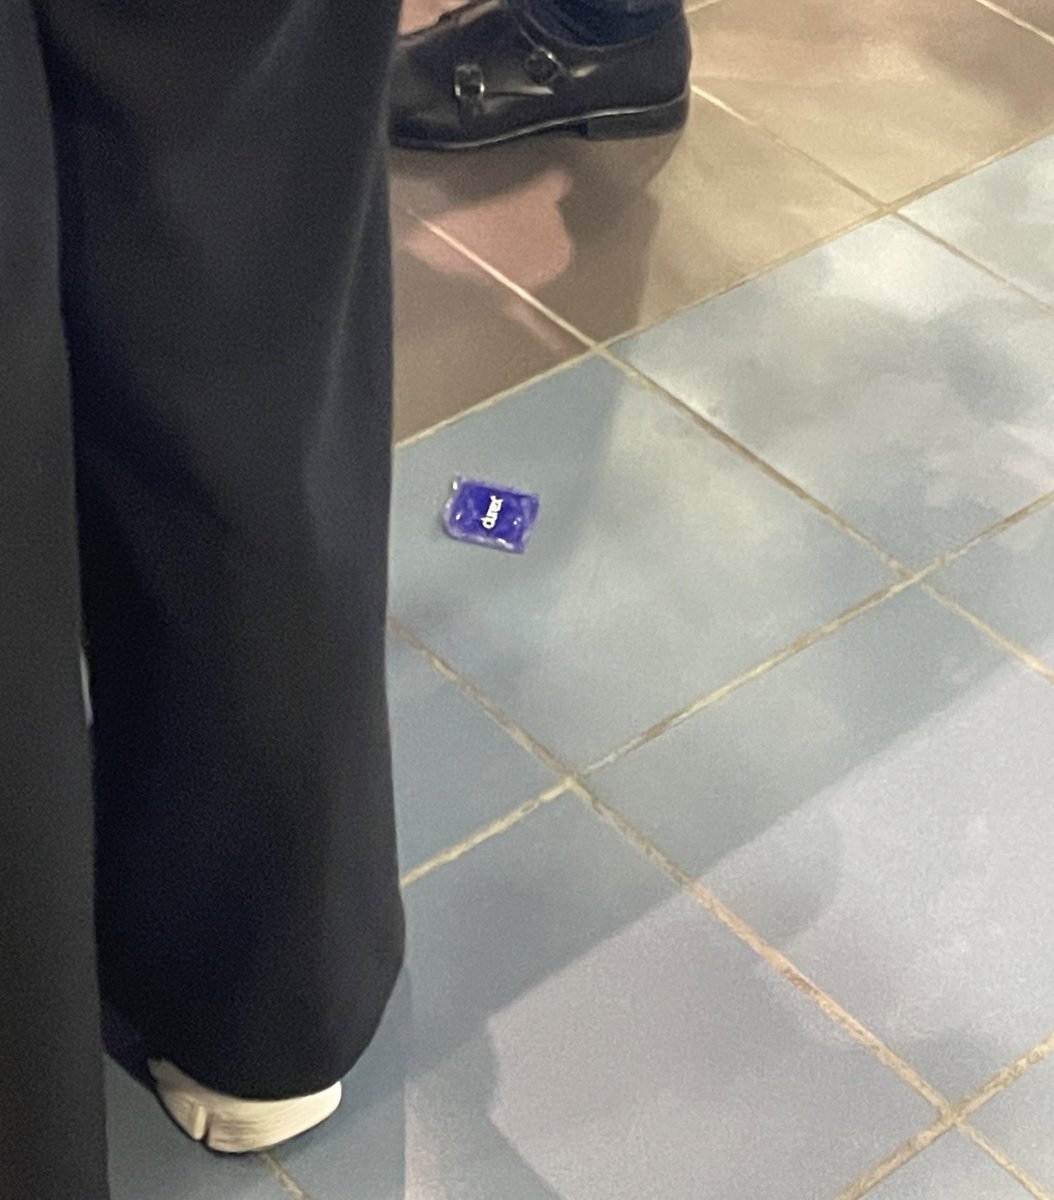 A guy just dropped a condom on the floor in front of me in the queue at the European Parliament canteen. Think it dropped out of his wallet. He didn’t notice.